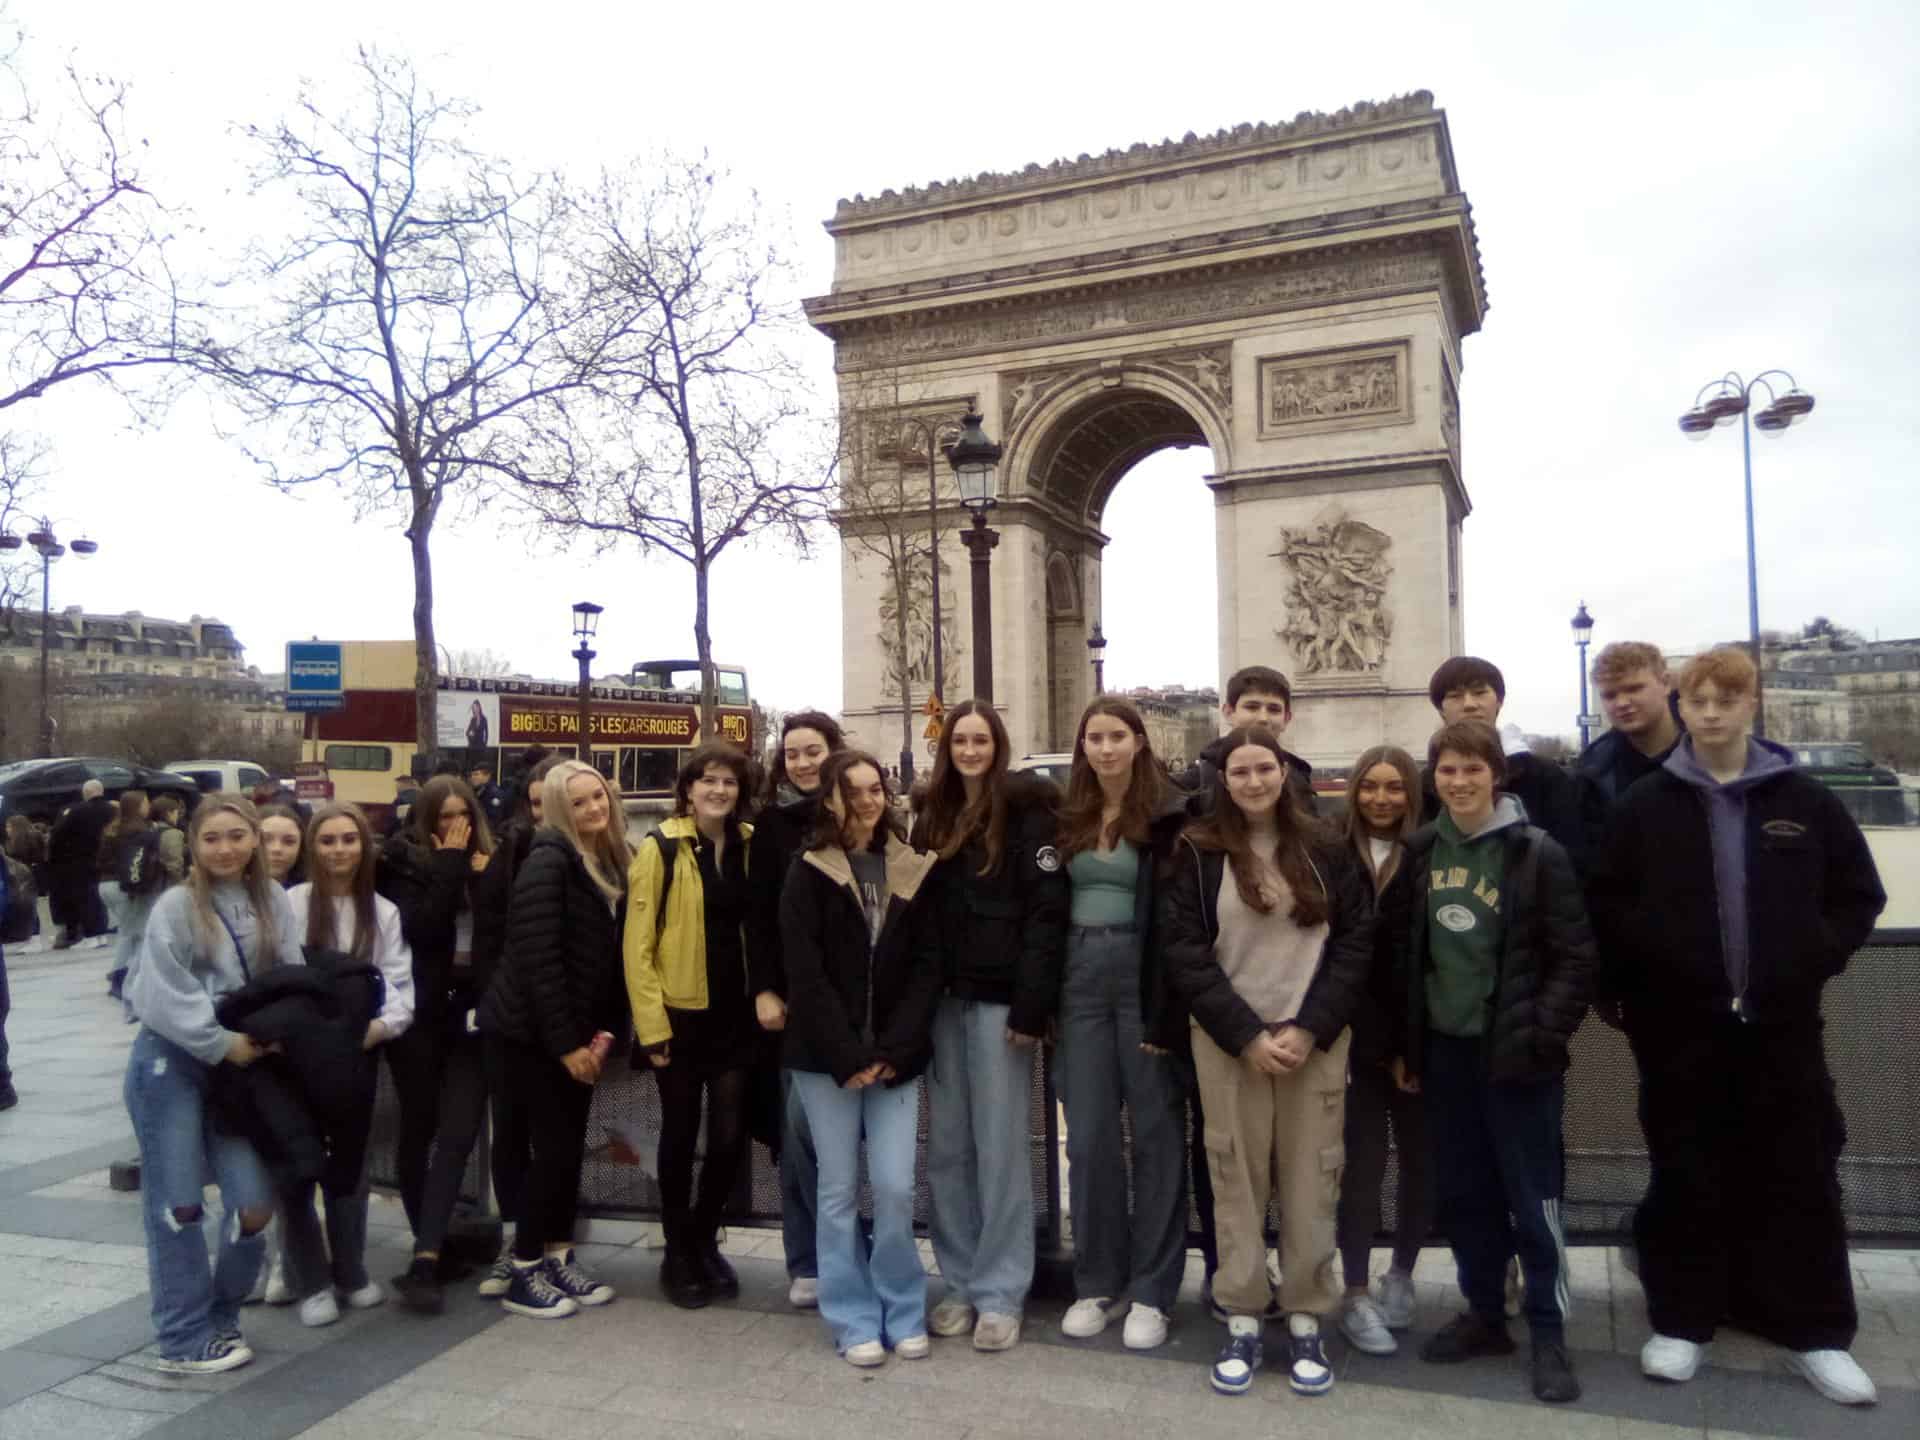 Students from Laurus Trust secondary schools stand in front of the Arc de Triomphe.